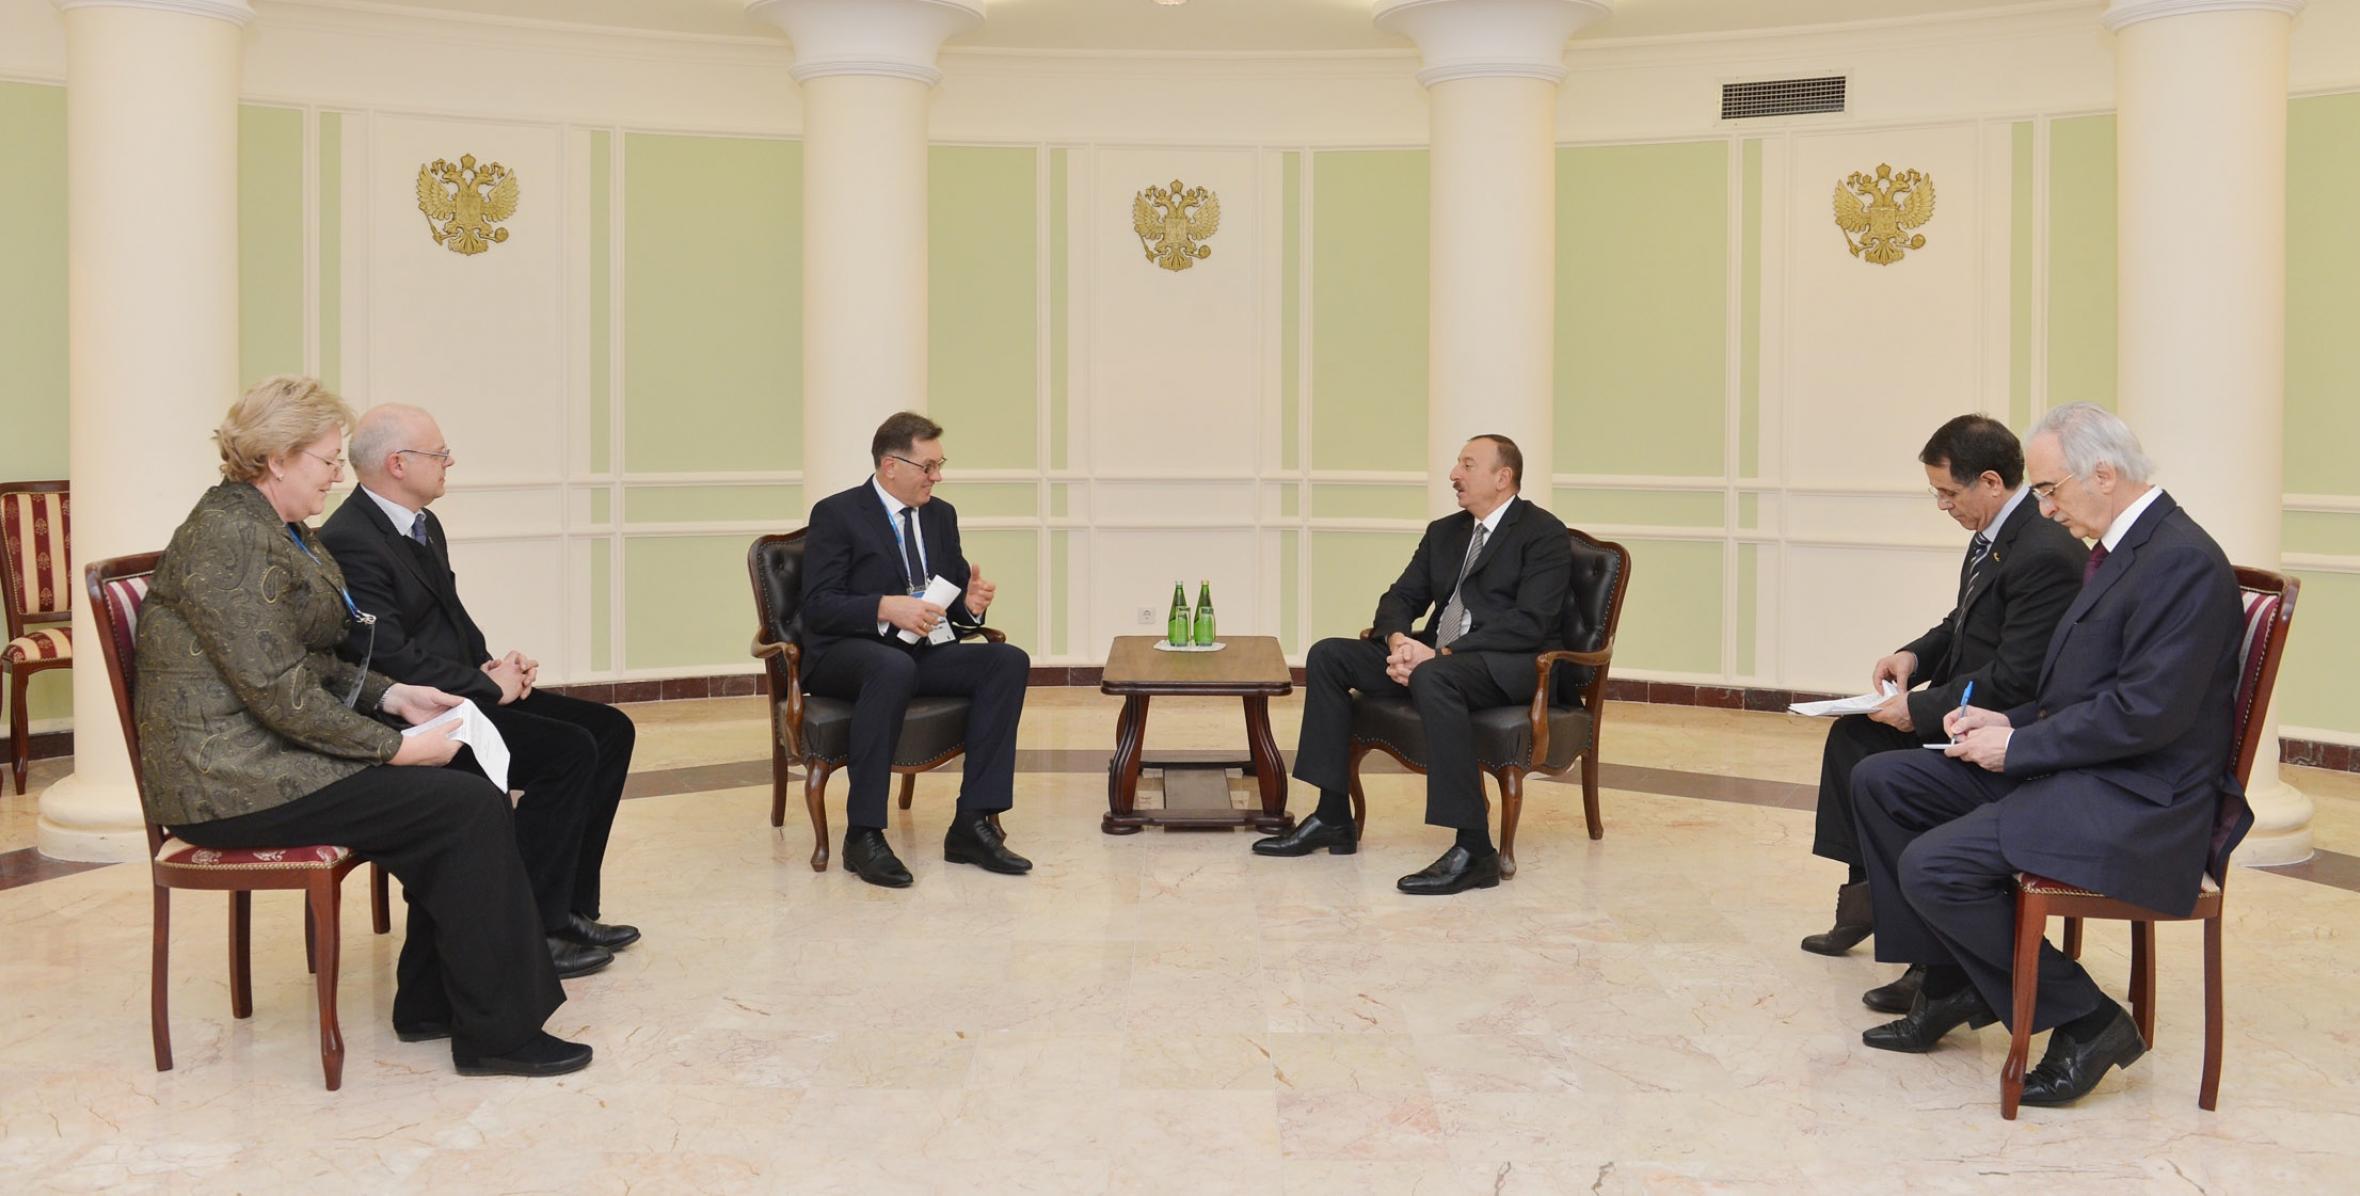 Ilham Aliyev met with Lithuanian Prime Minister Algirdas Butkevicius